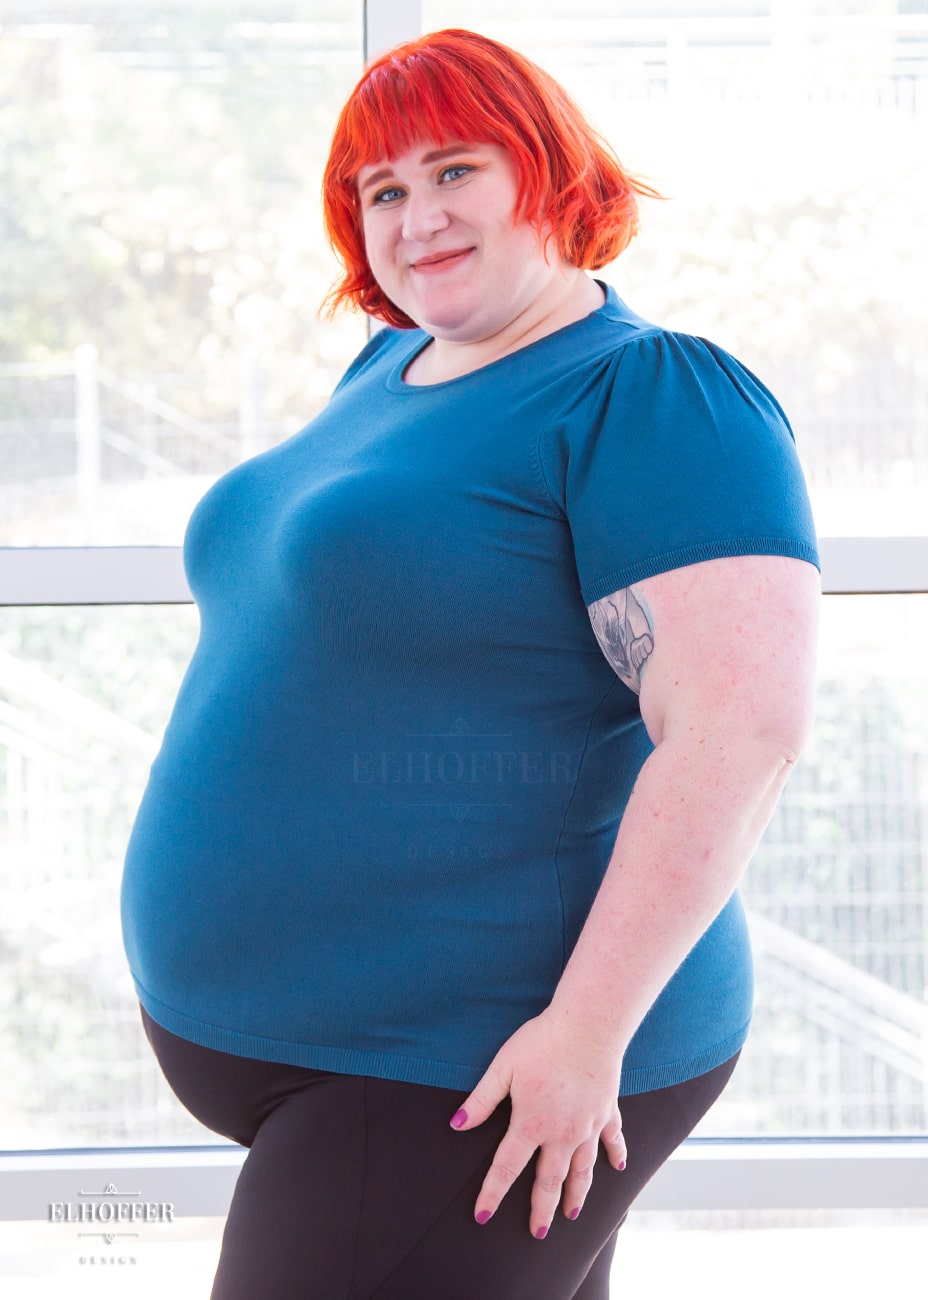 Logan, a fair skinned 3xl model with short orange hair with bangs, is wearing a short sleeve light weight peacock teal knit top. The top hits about mid hip in length and the sleeves have pleated gathering at the shoulders.